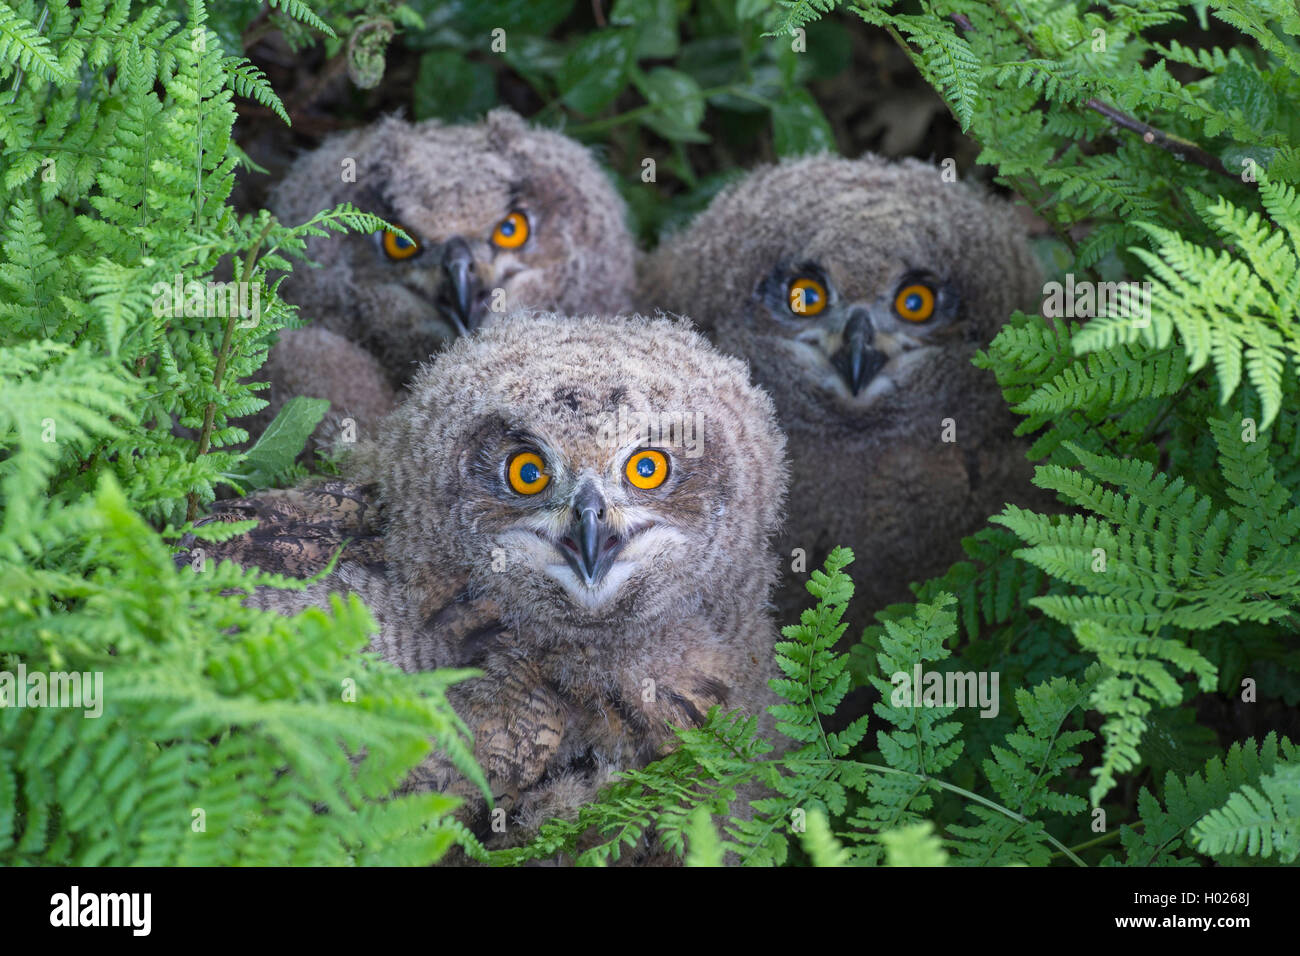 northern eagle owl (Bubo bubo), three young eagle owls in fern, front view, Germany, Lower Saxony Stock Photo